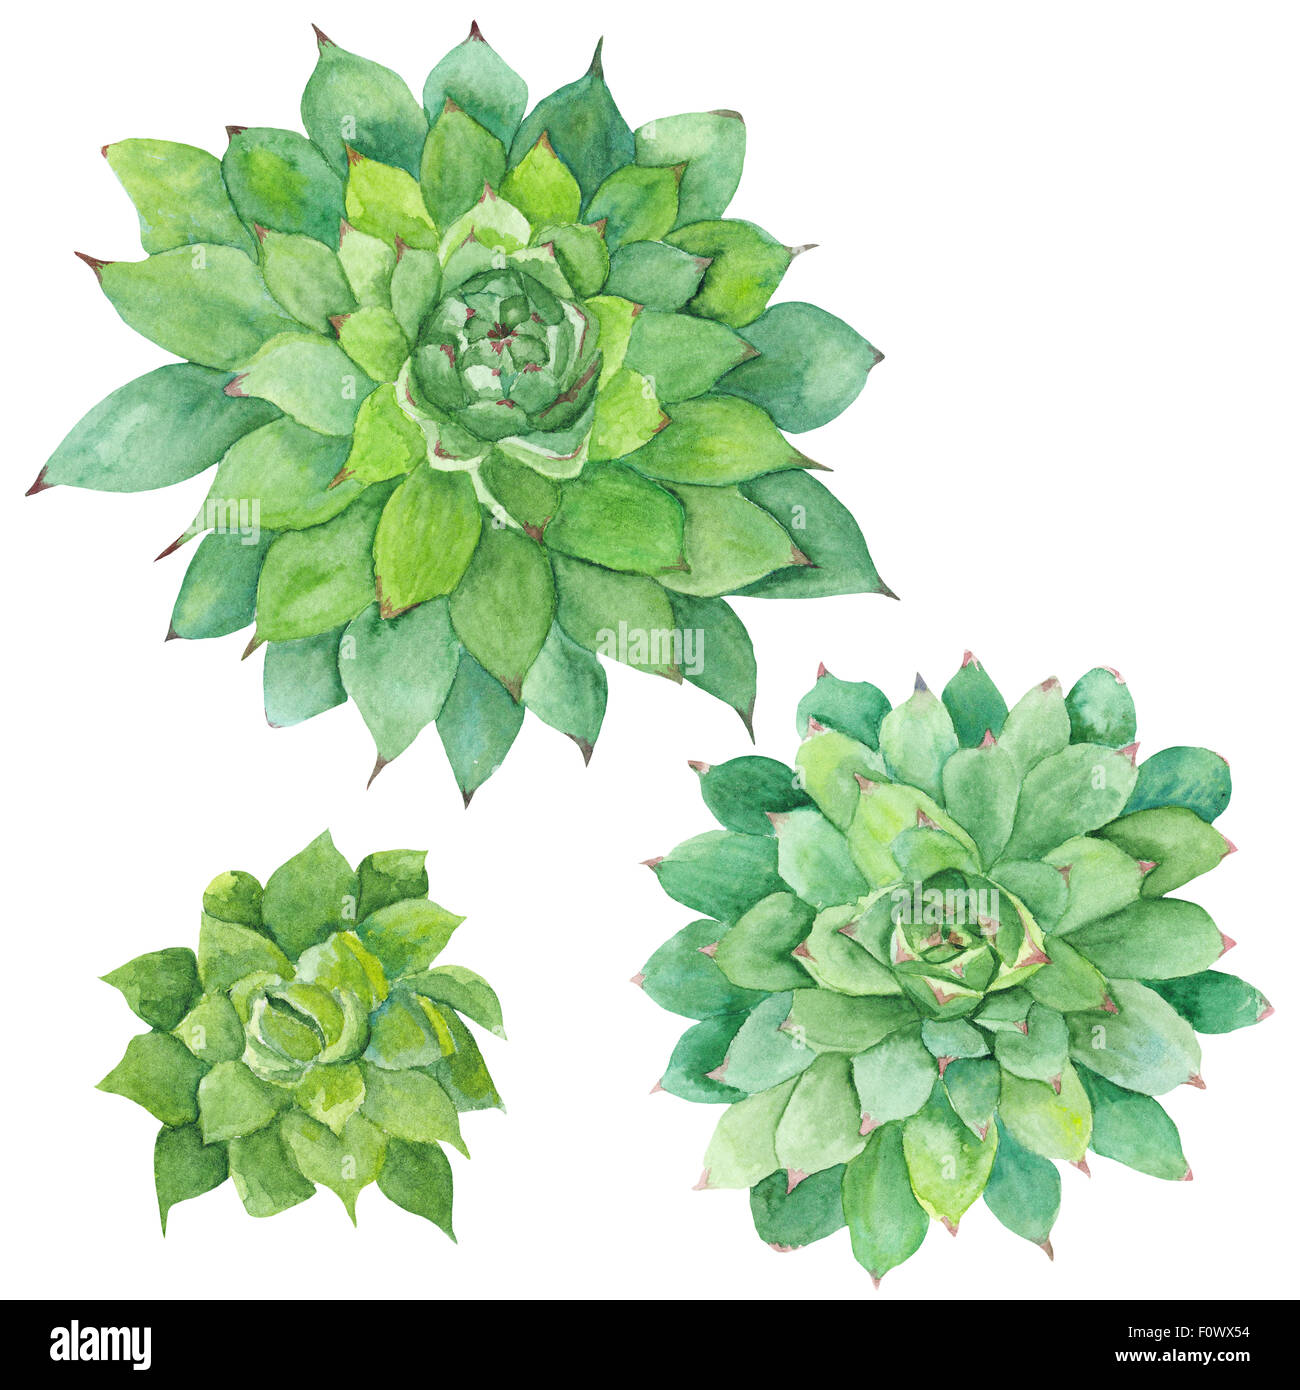 Hand-painted drawing with three green tropical plants isolated on white background, Sempervivum botanical illustration Stock Photo